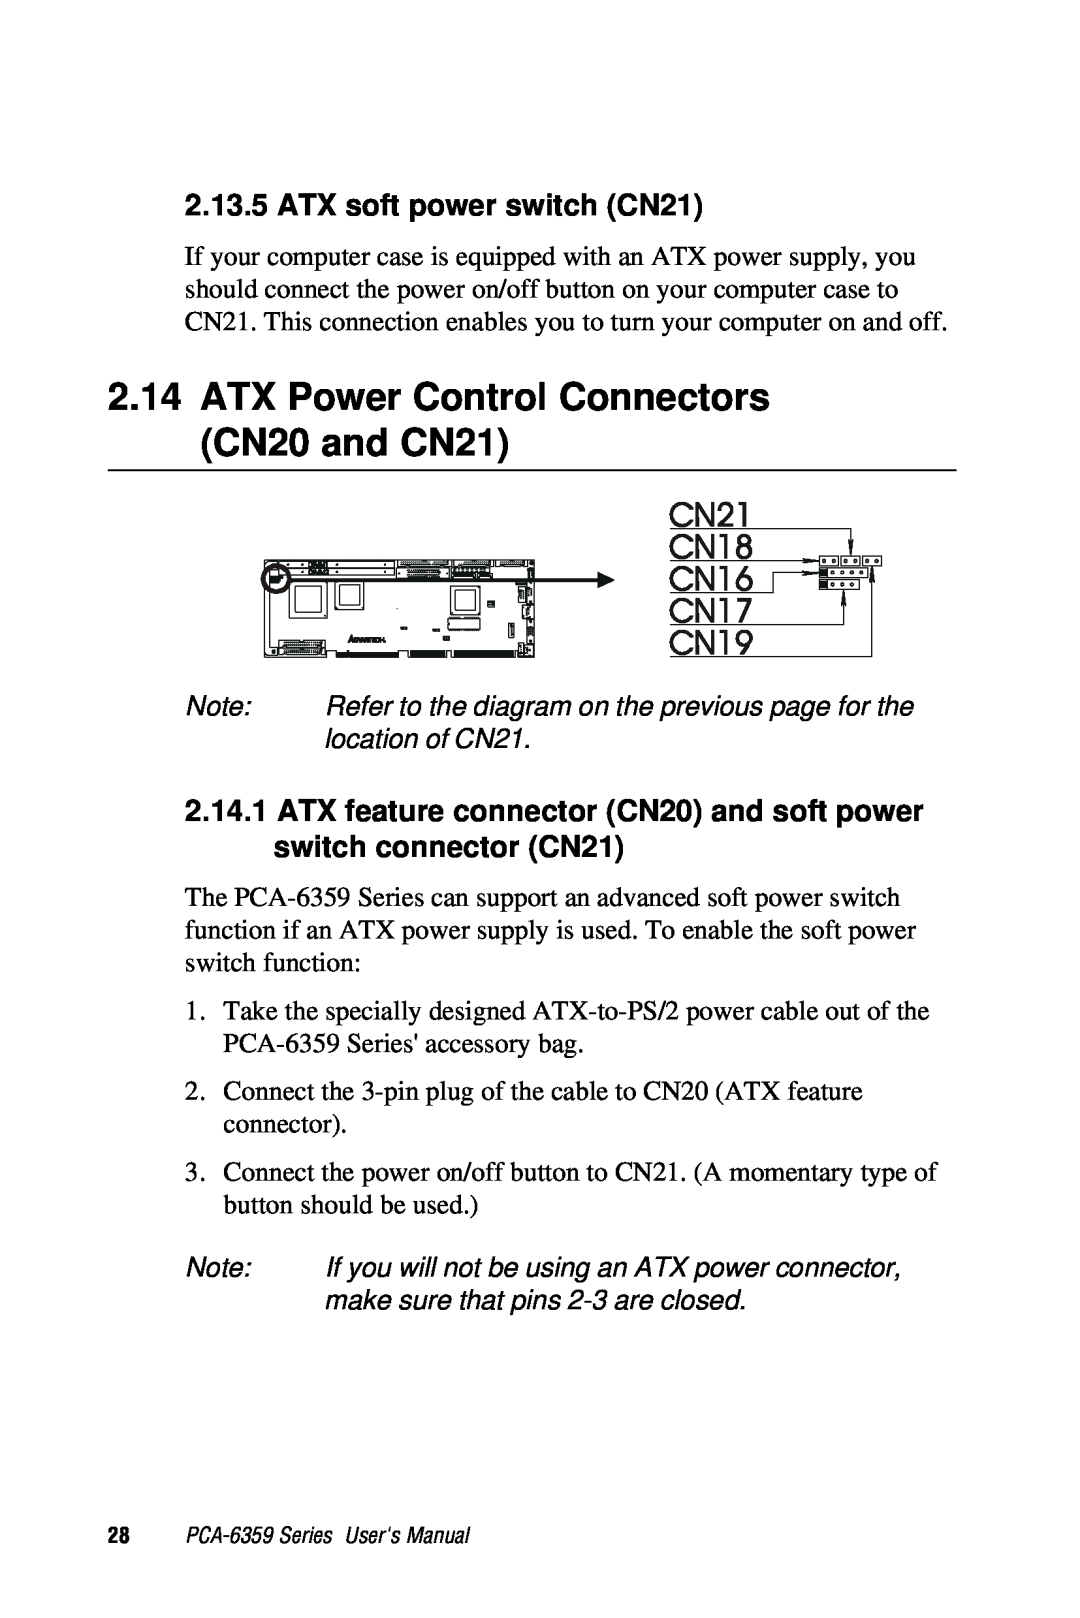 Advantech PCA-6359 user manual ATX Power Control Connectors CN20 and CN21, ATX soft power switch CN21, location of CN21 